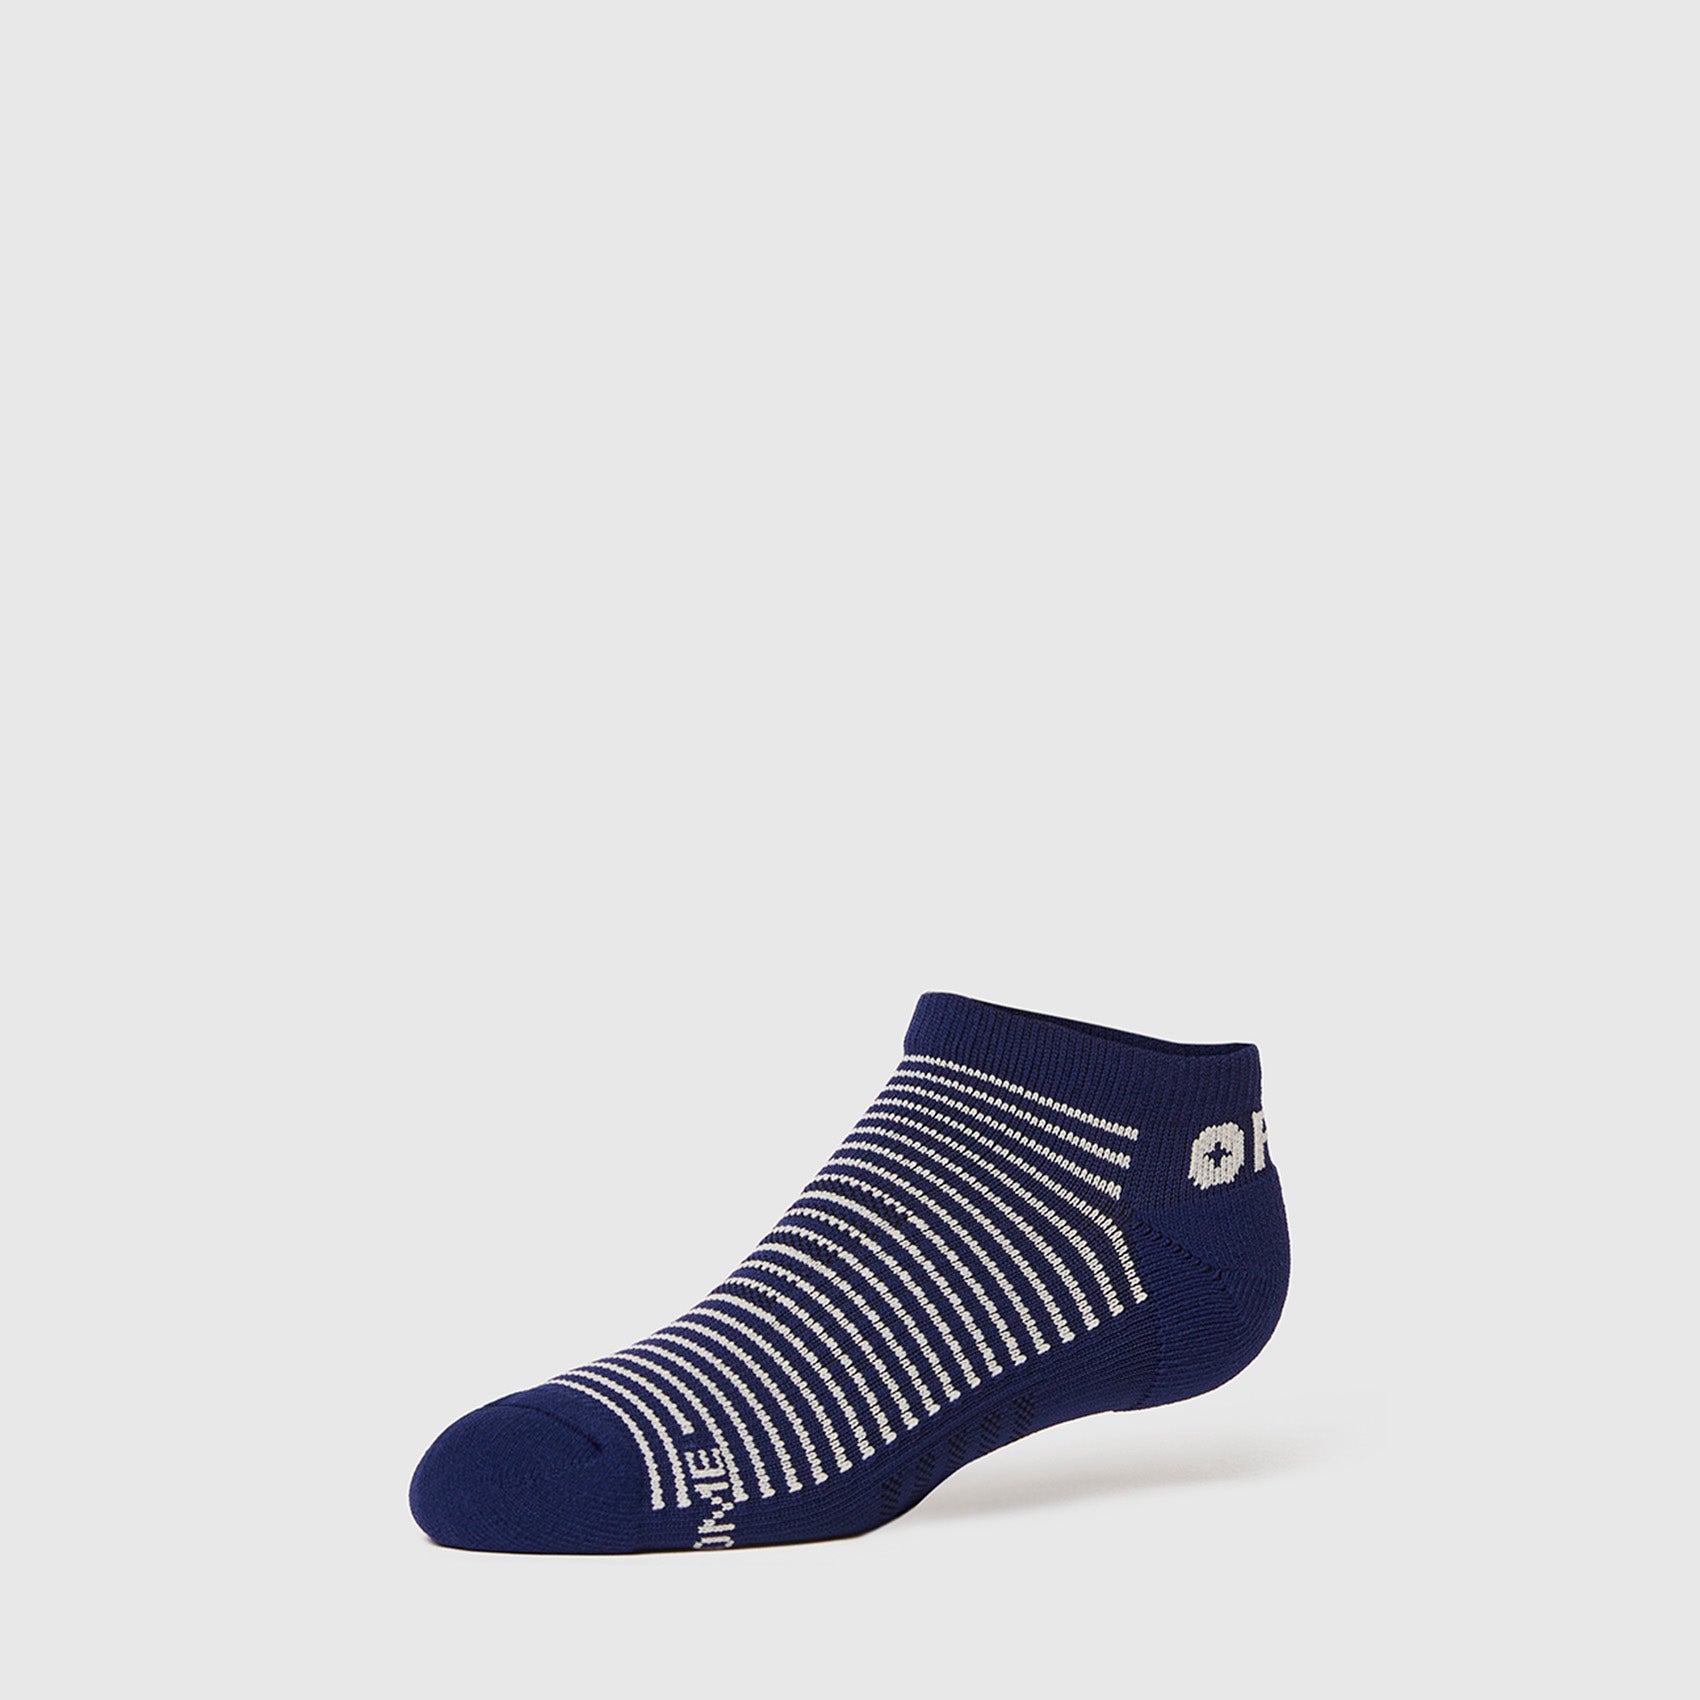 https://cdn.shopify.com/s/files/1/0139/8942/products/Q1_2022_12_NAVY_ANKLESOCKS_W_GHOST_16732_743a6393-6e09-4a7a-bfd5-ad092228f385.jpg?v=1674078441